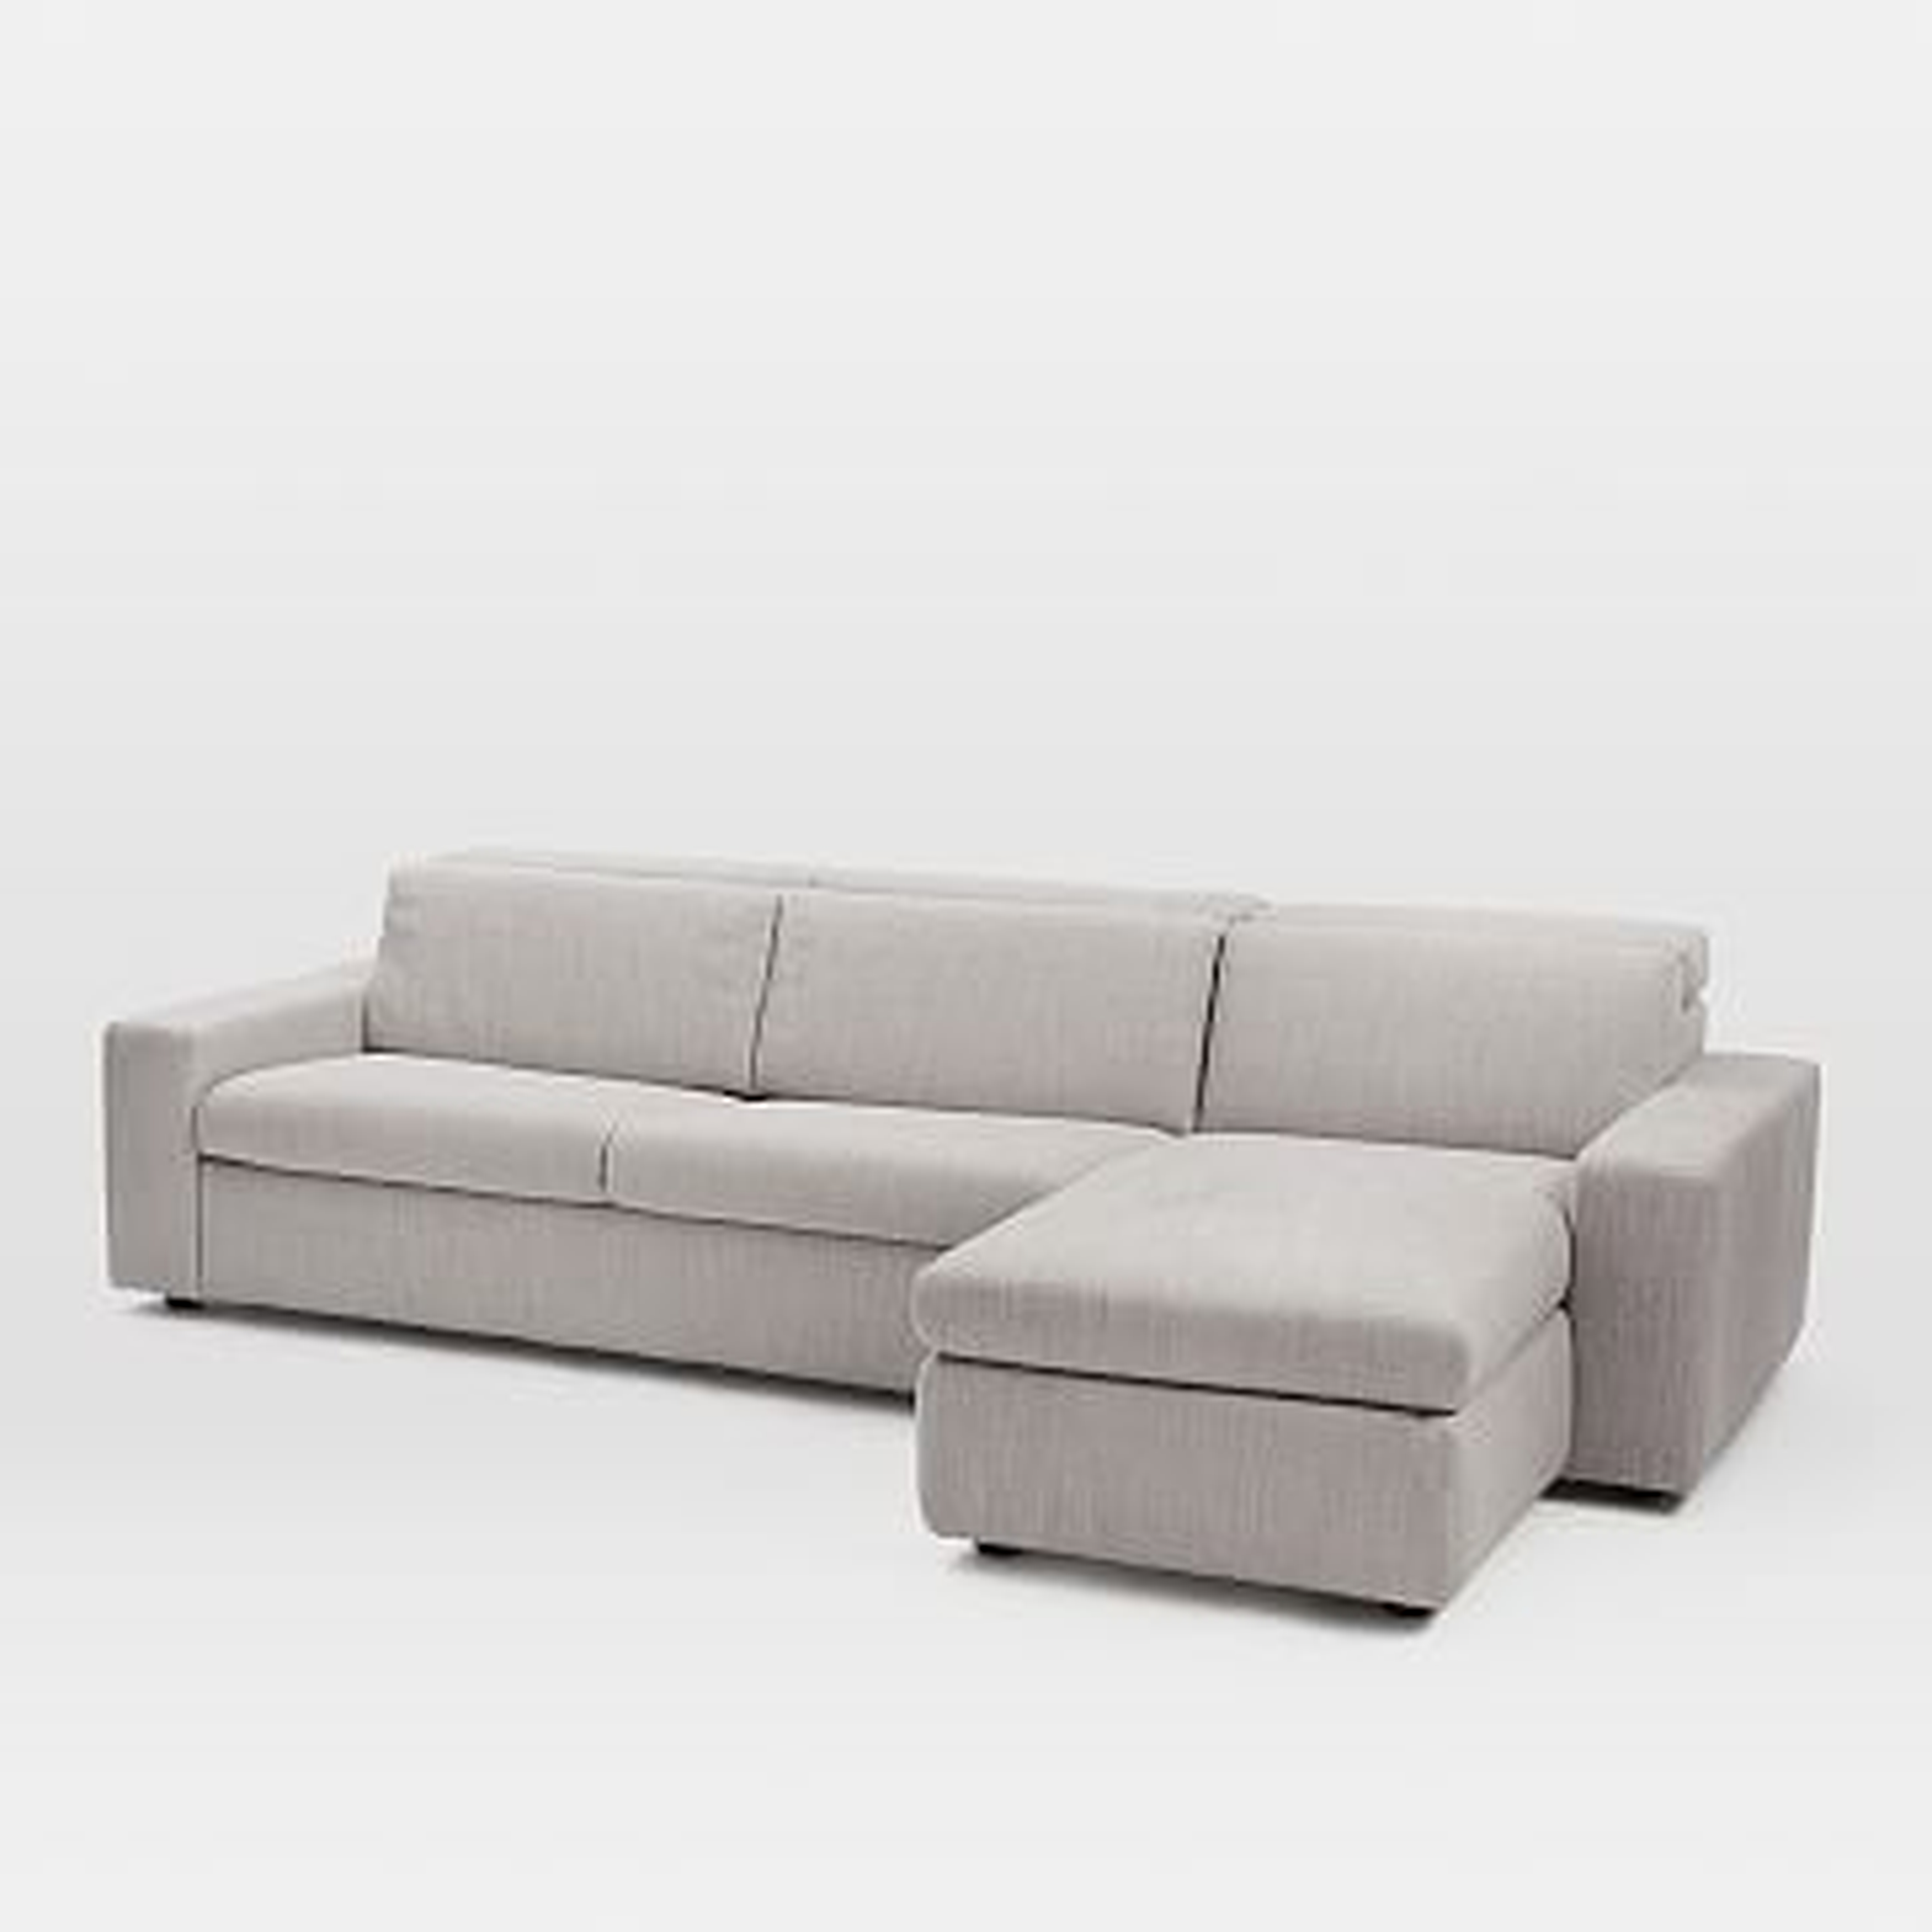 Enzo Sleep + Store 3-Seater Sectional Set 13, Left Arm Sleeper, Right Arm Store Chaise, Basket Slub, Feather Gray - West Elm